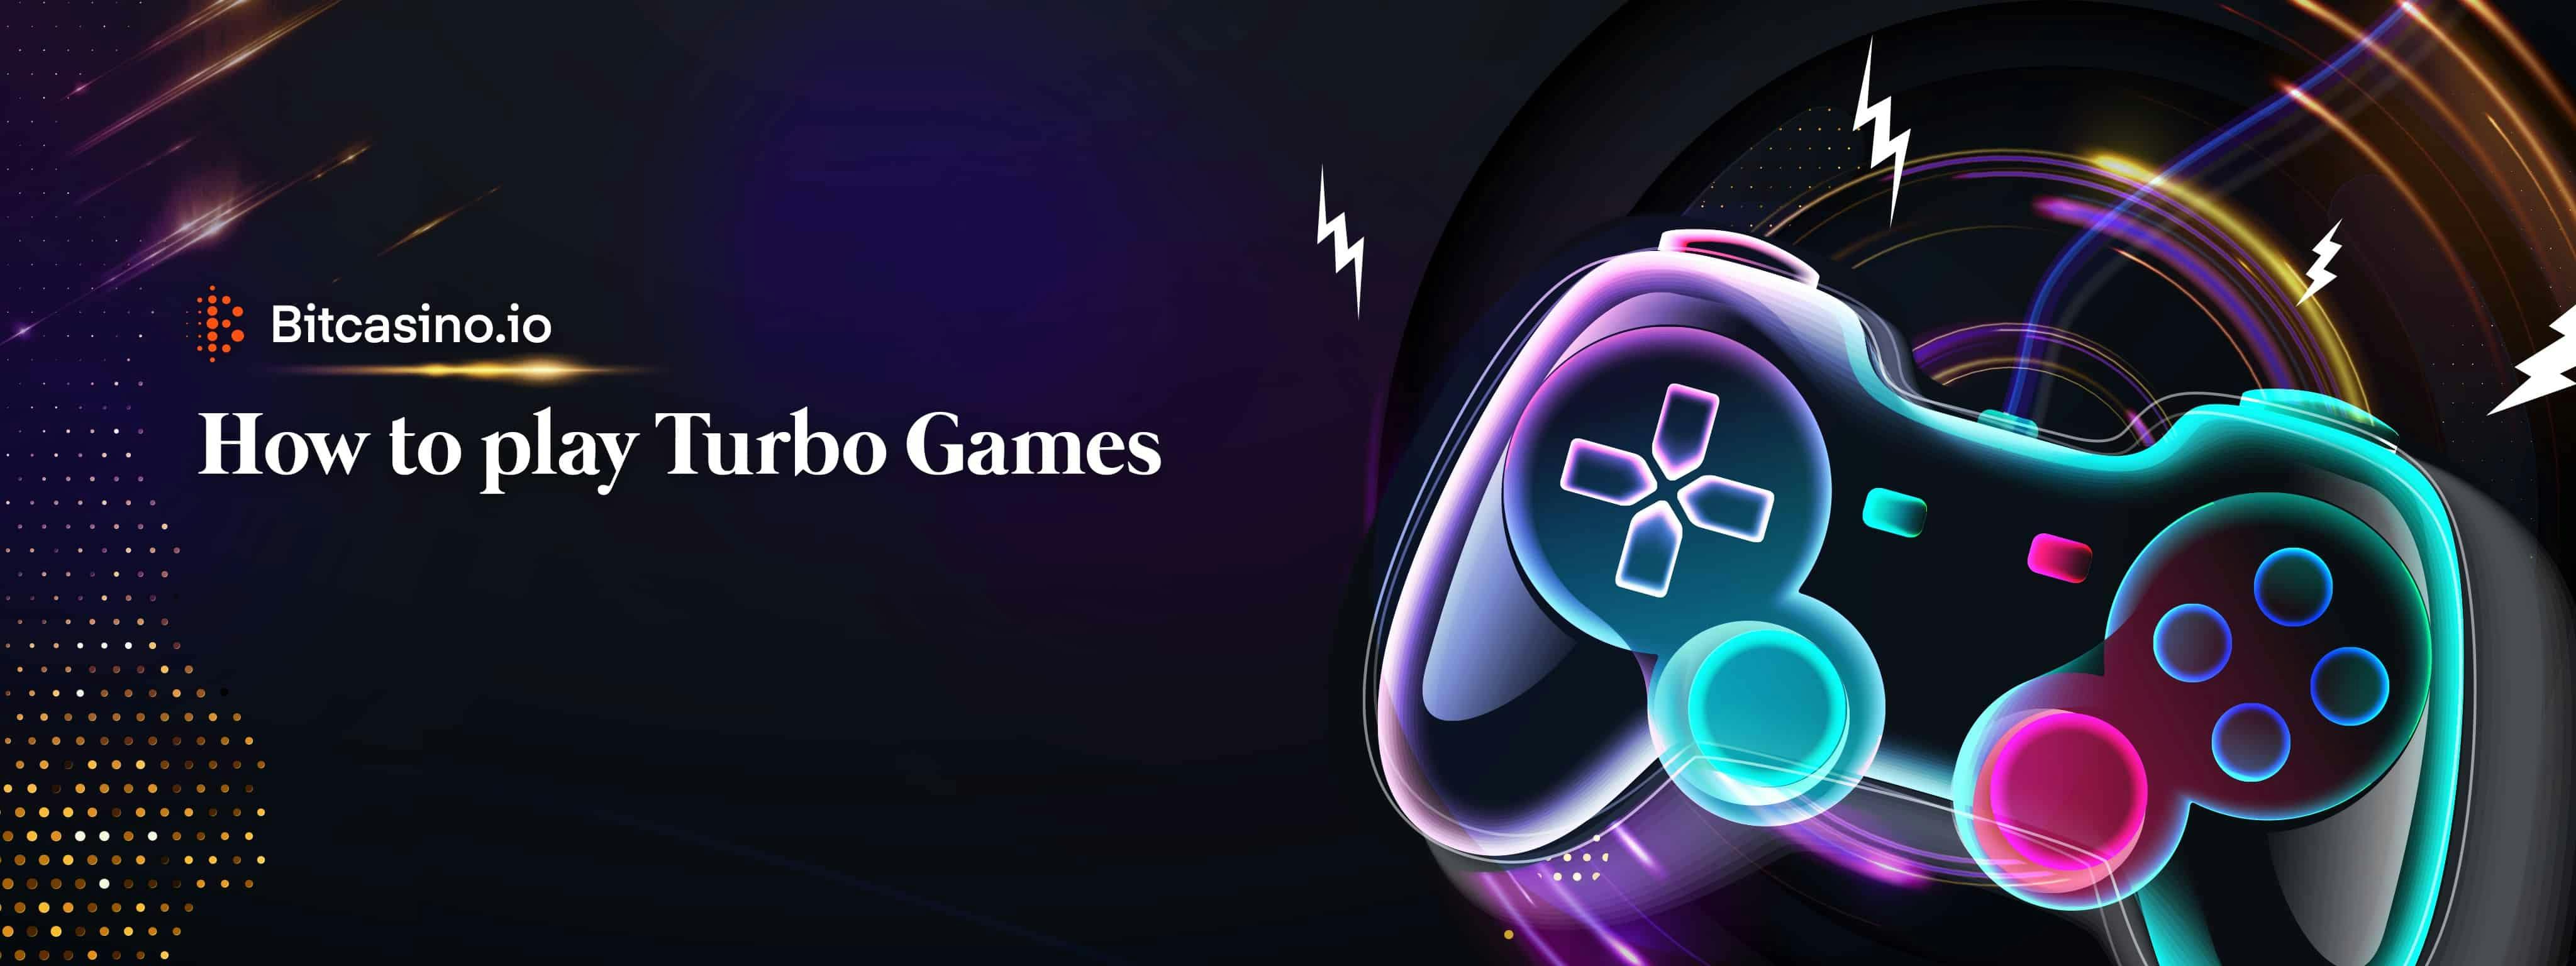 How to play Turbo Games at Bitcasino